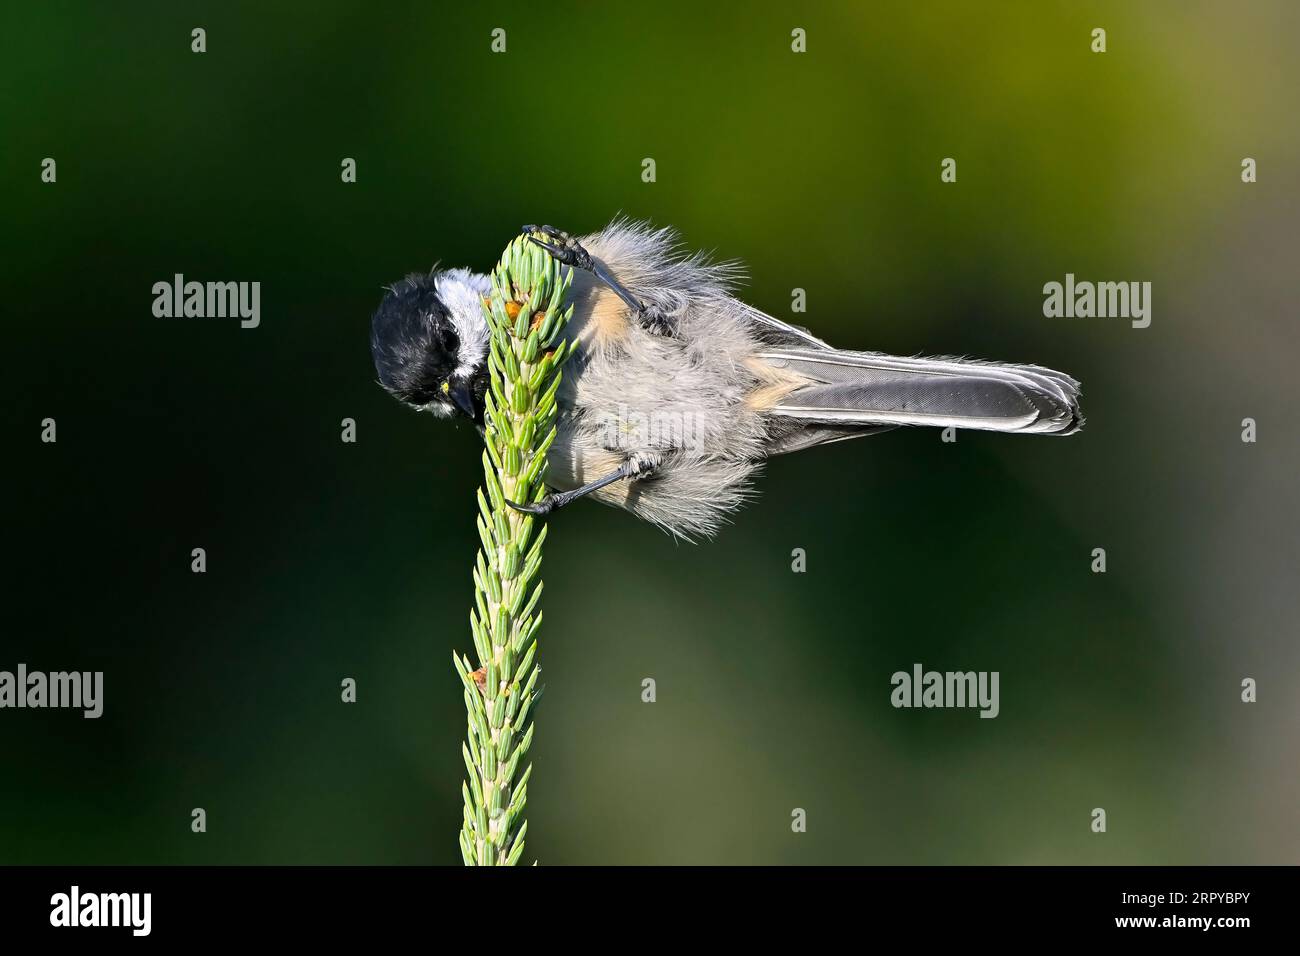 A Chickadee bird 'Poecile atricapillus',  foraging for insects on a spruce tree top Stock Photo